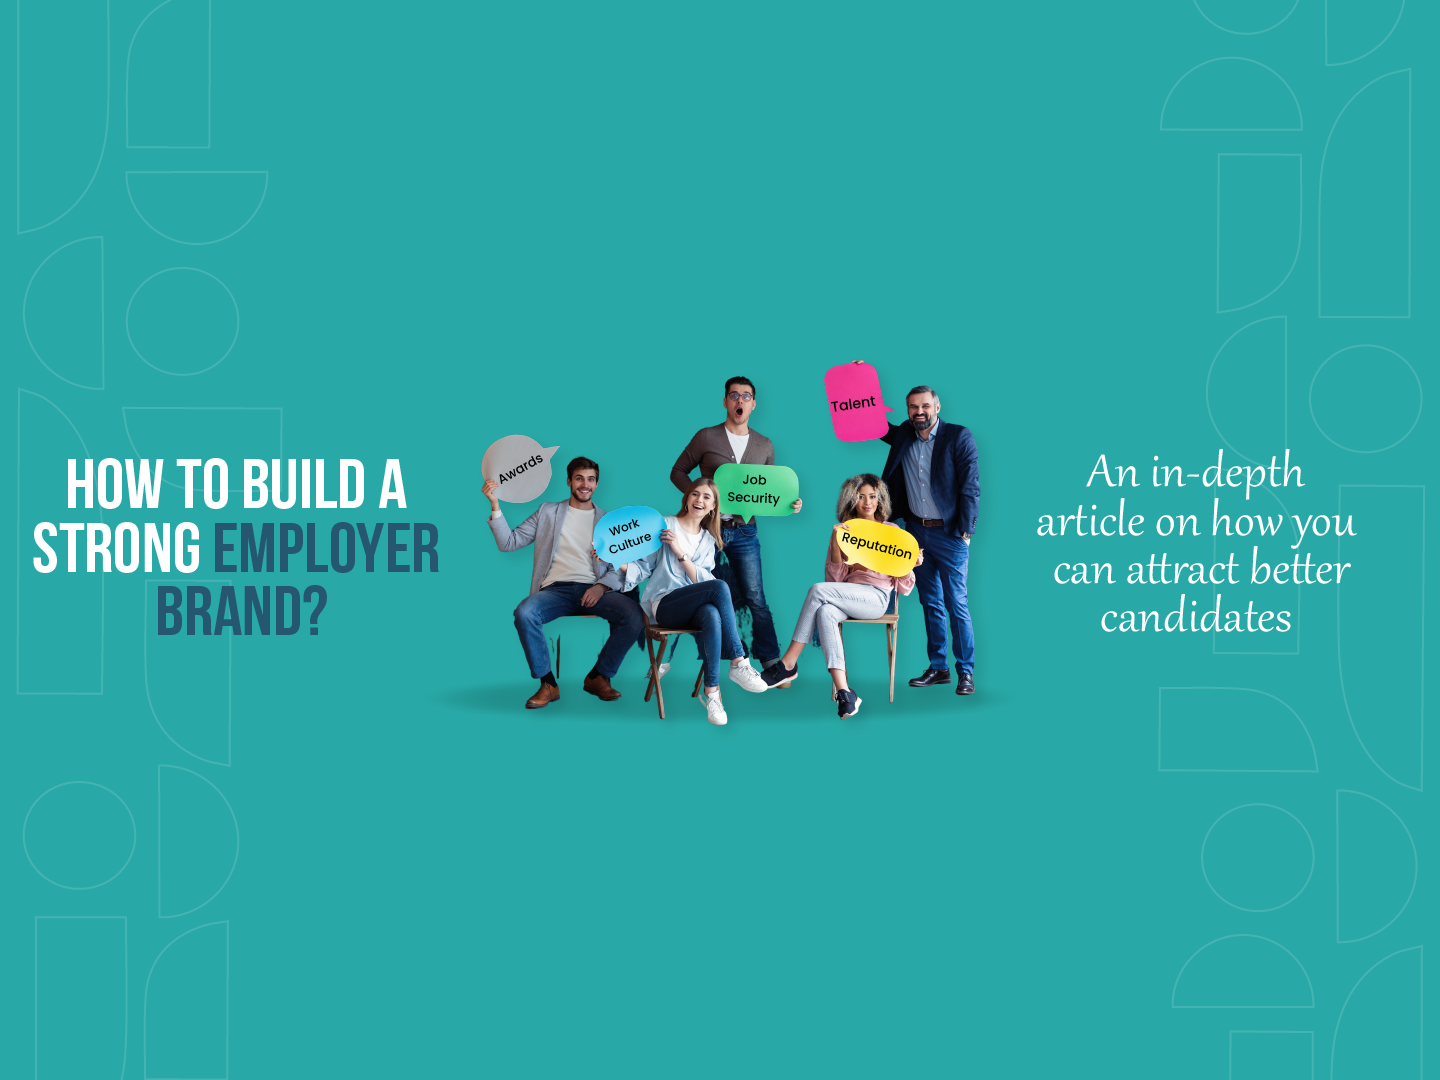 How to Build a Strong Employer Brand?